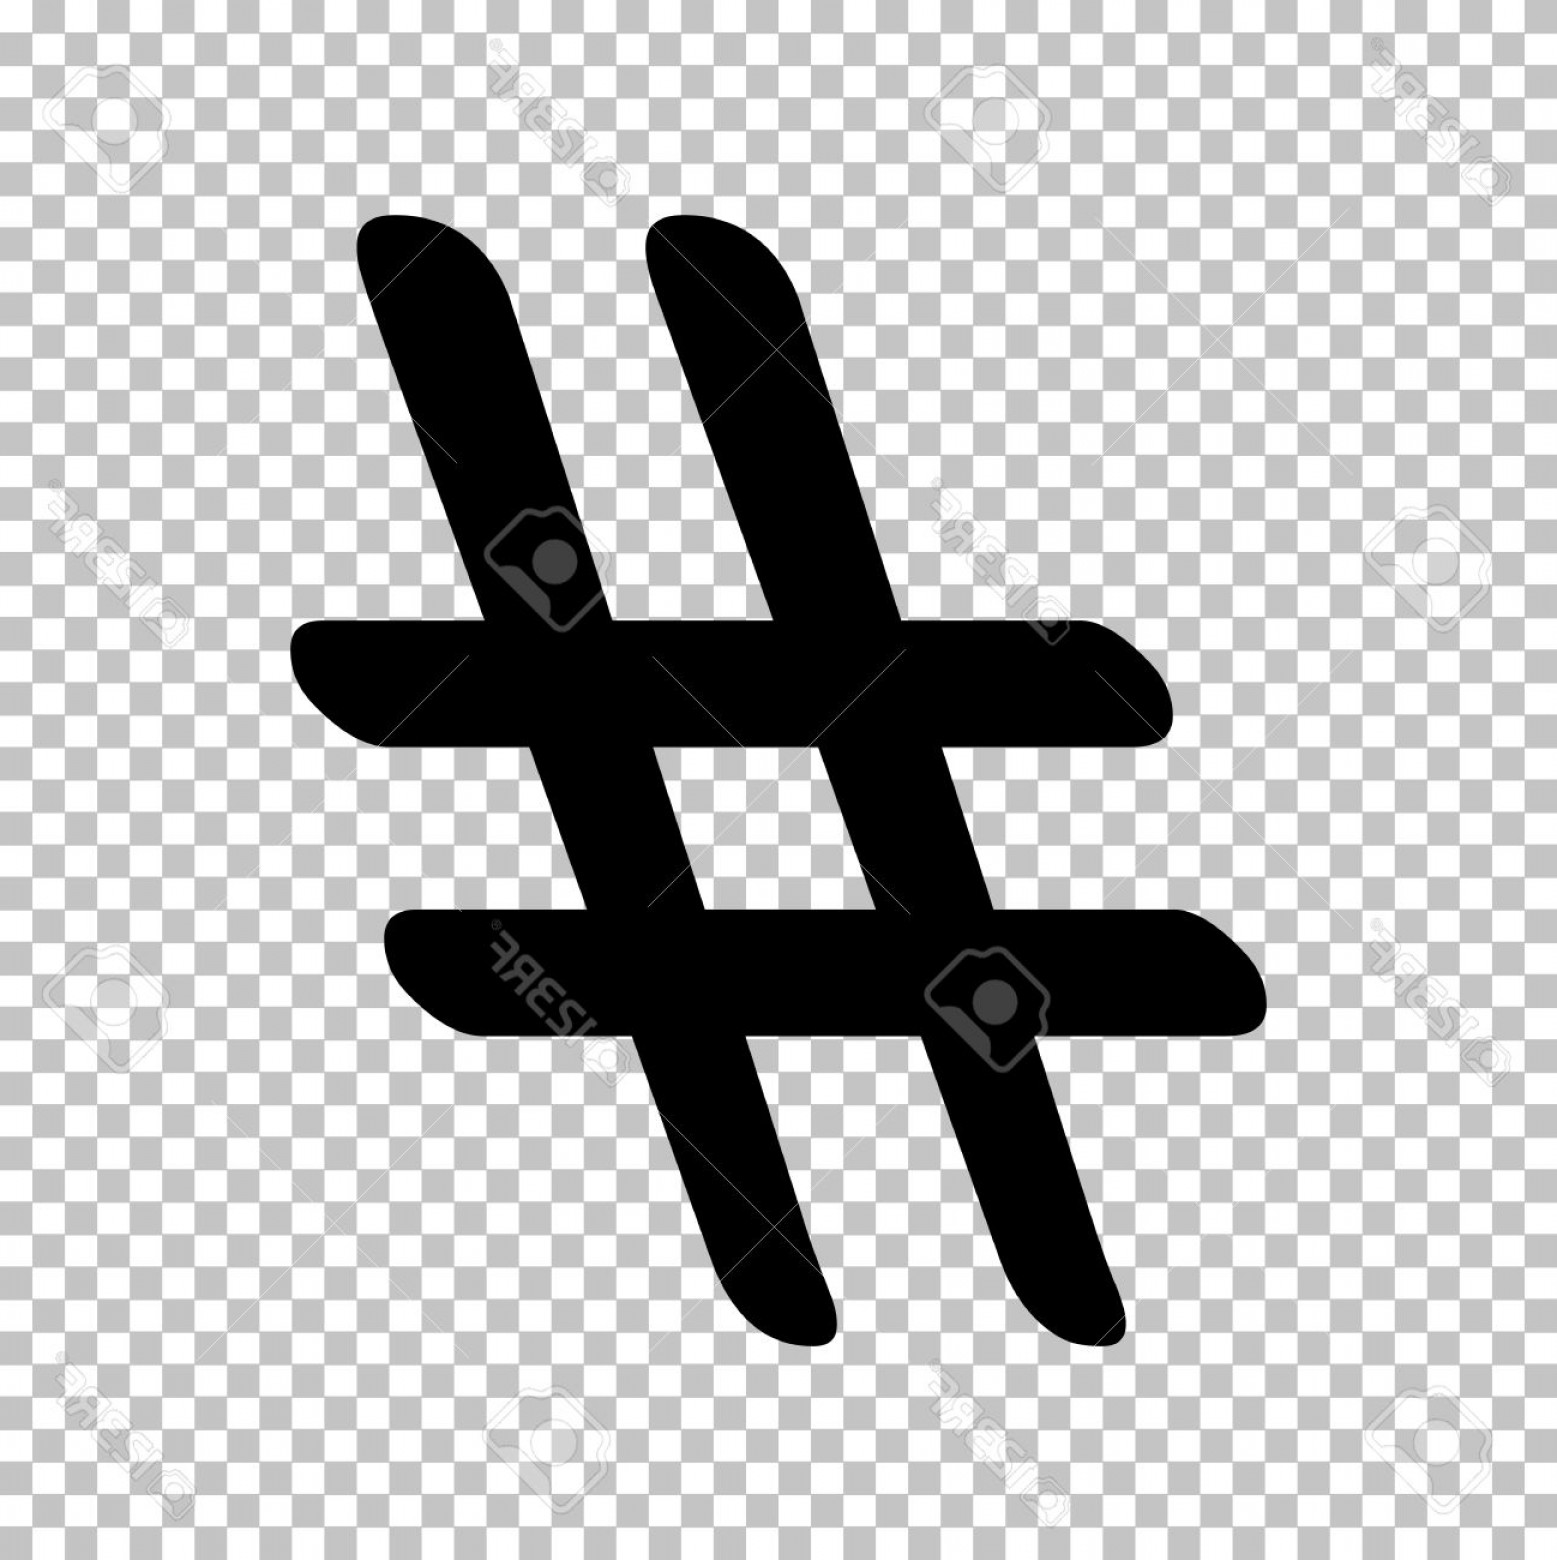 Hashtag Icon Vector At Collection Of Hashtag Icon Vector Free For Personal Use